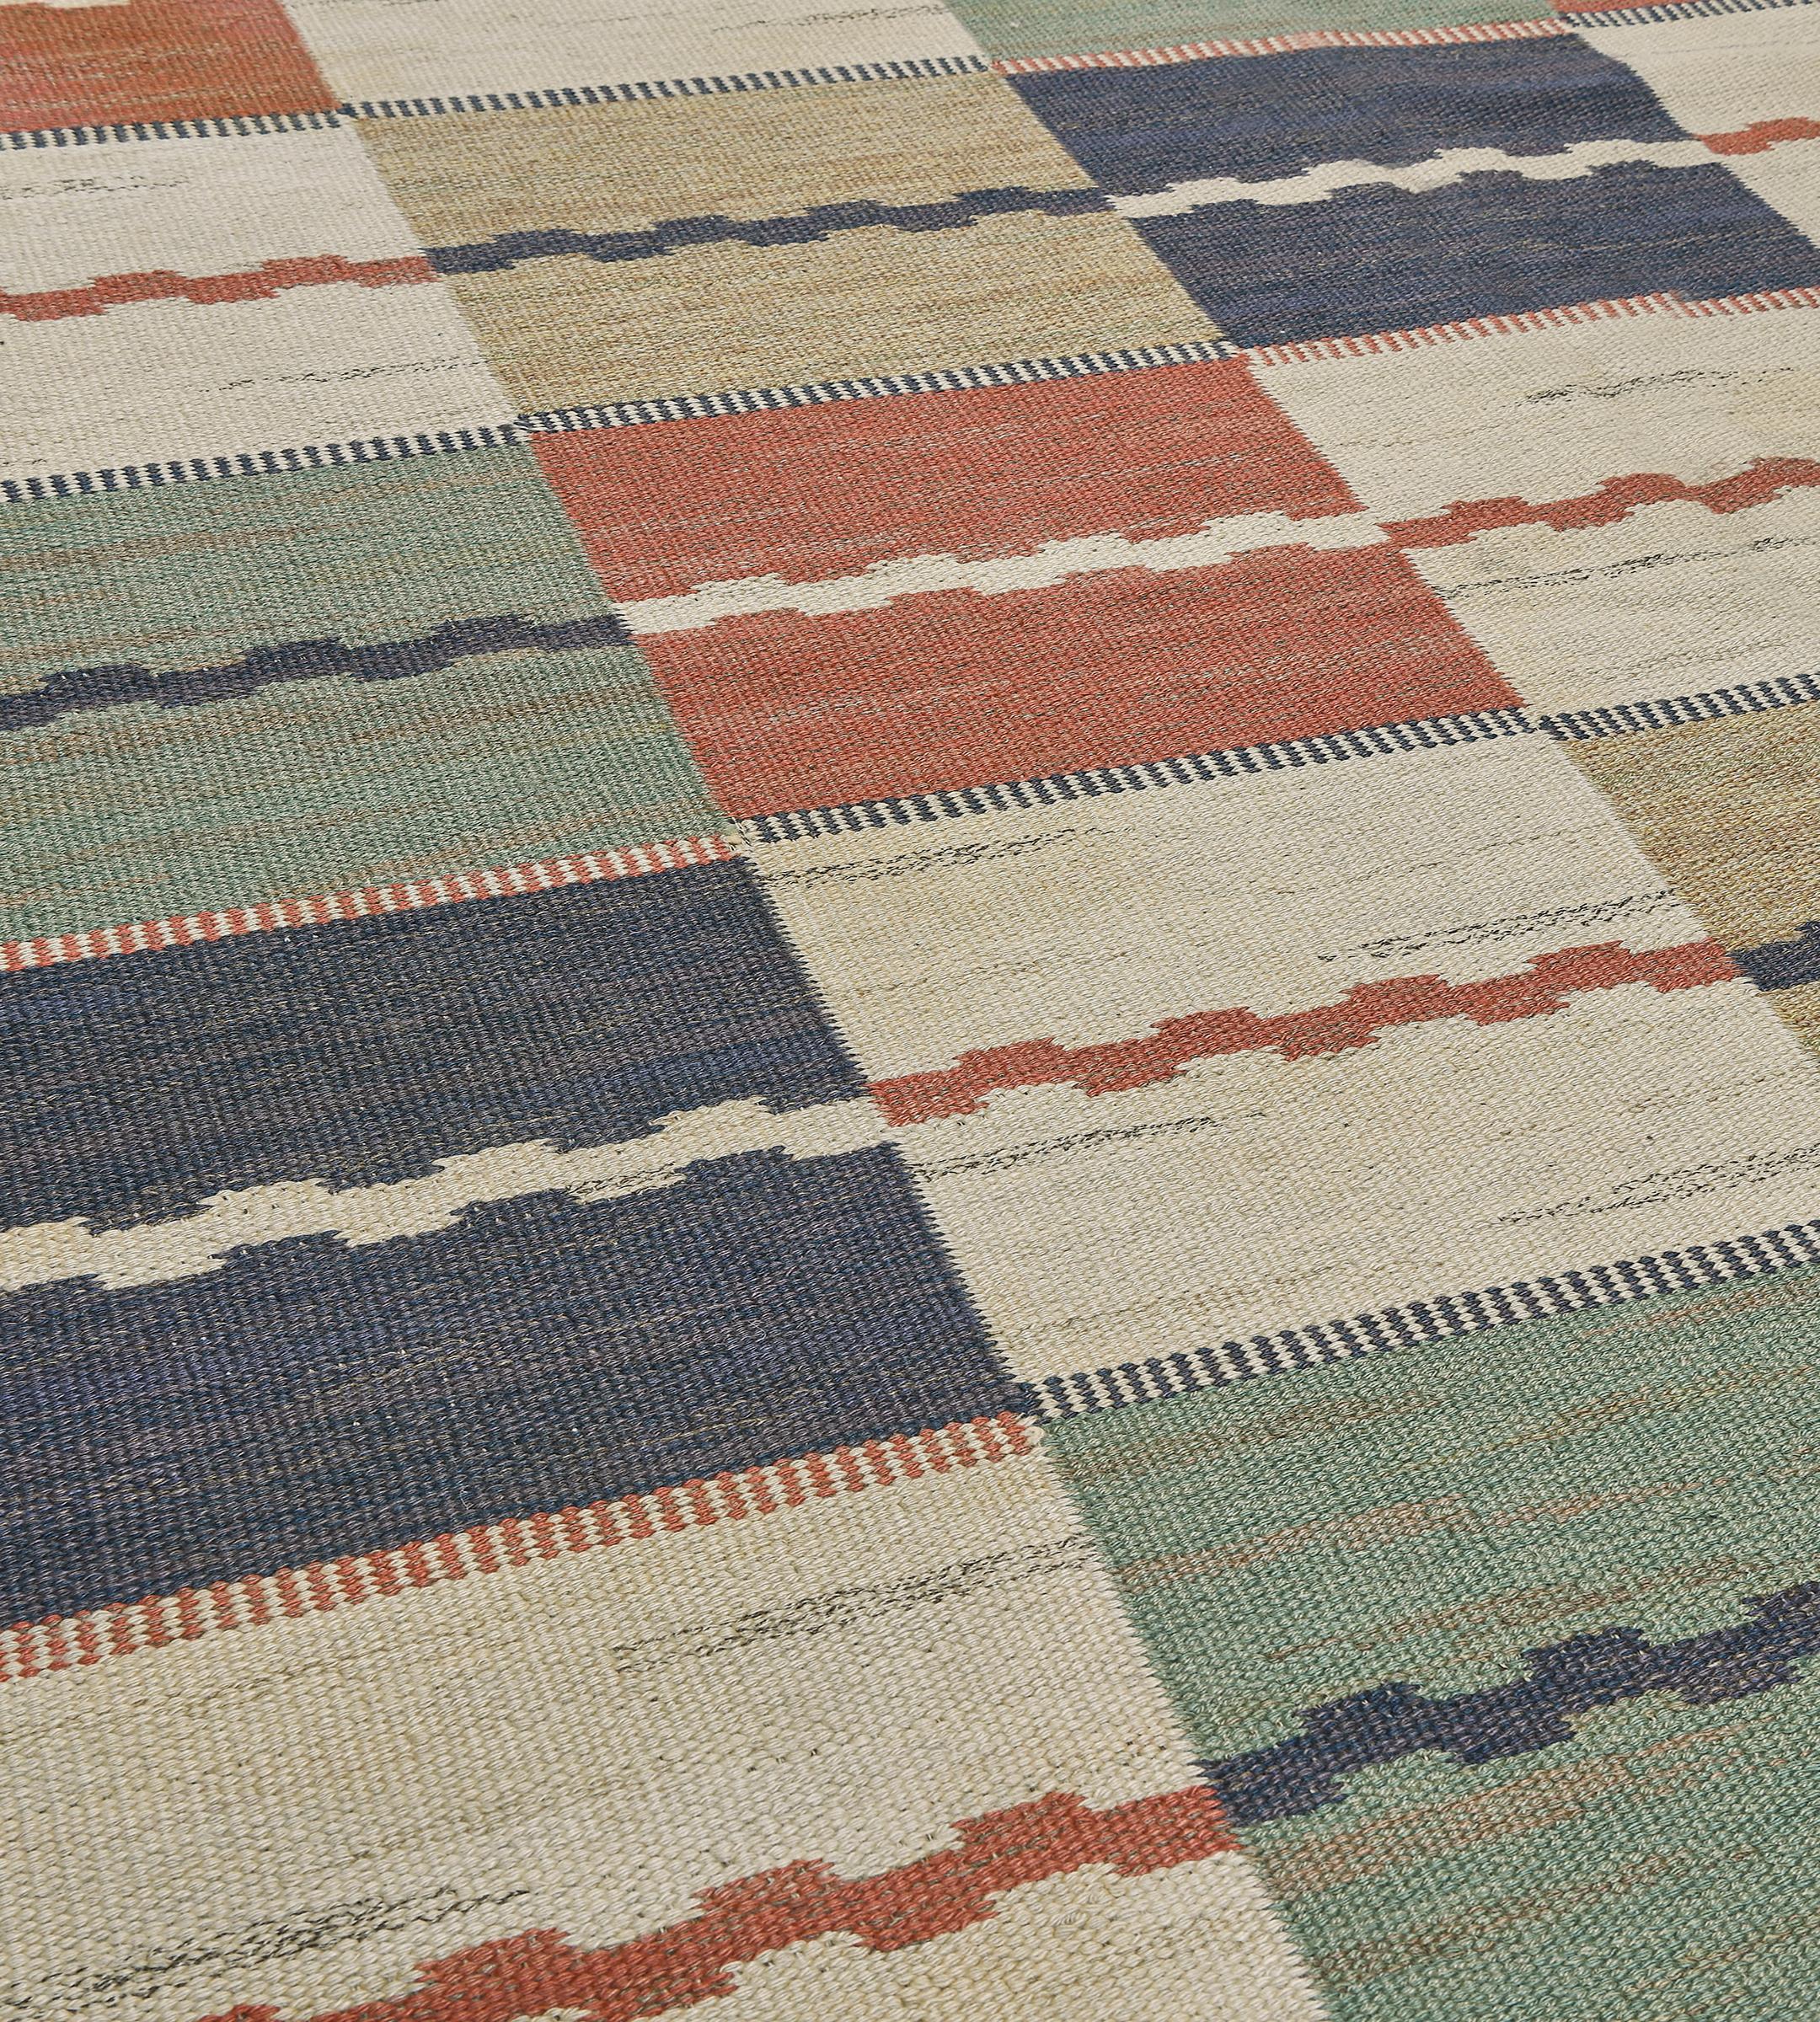 This traditional handwoven Swedish deco rug has a flat-weave polychrome checkered field interrupted by delicate geometric stripes, in a similar whimsical geometric lateral border. This exceptional example of a Swedish Kilim is signed by its artisan